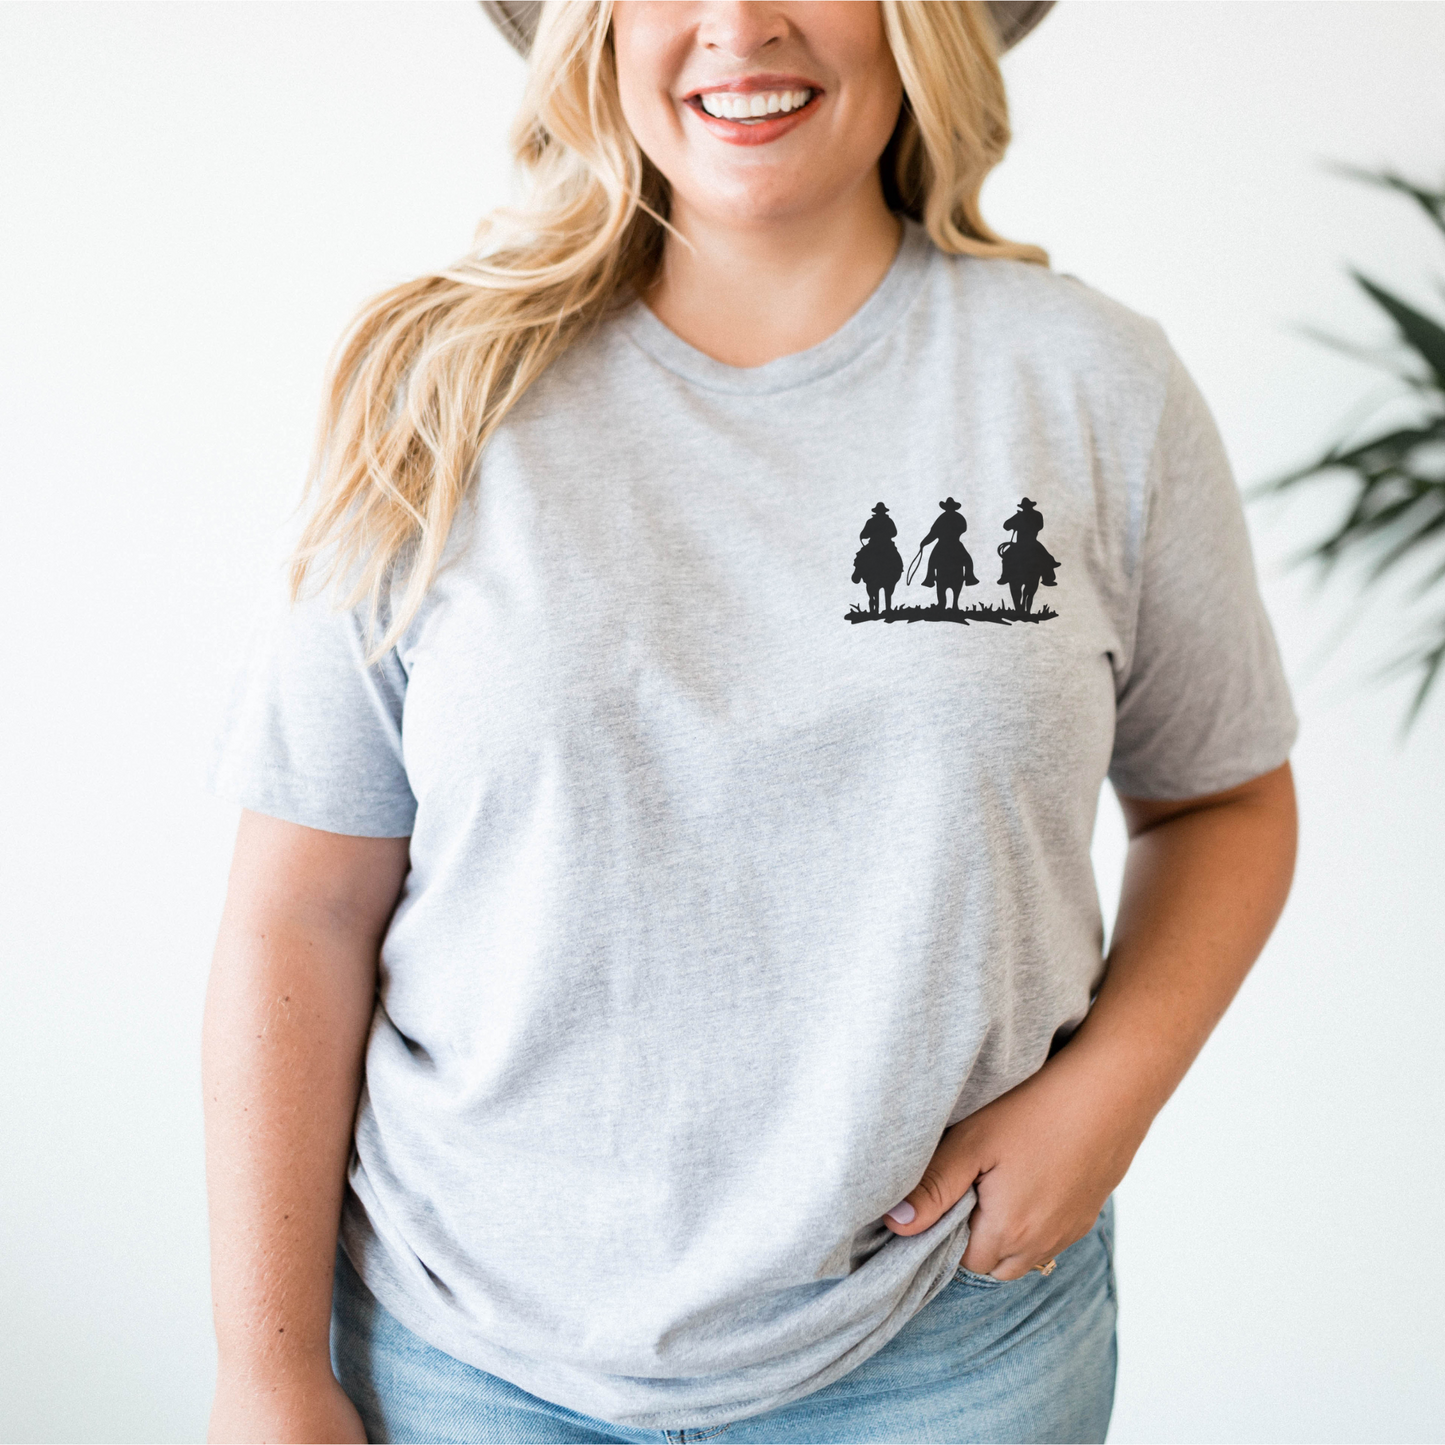 Southern Women This Graphic Tee